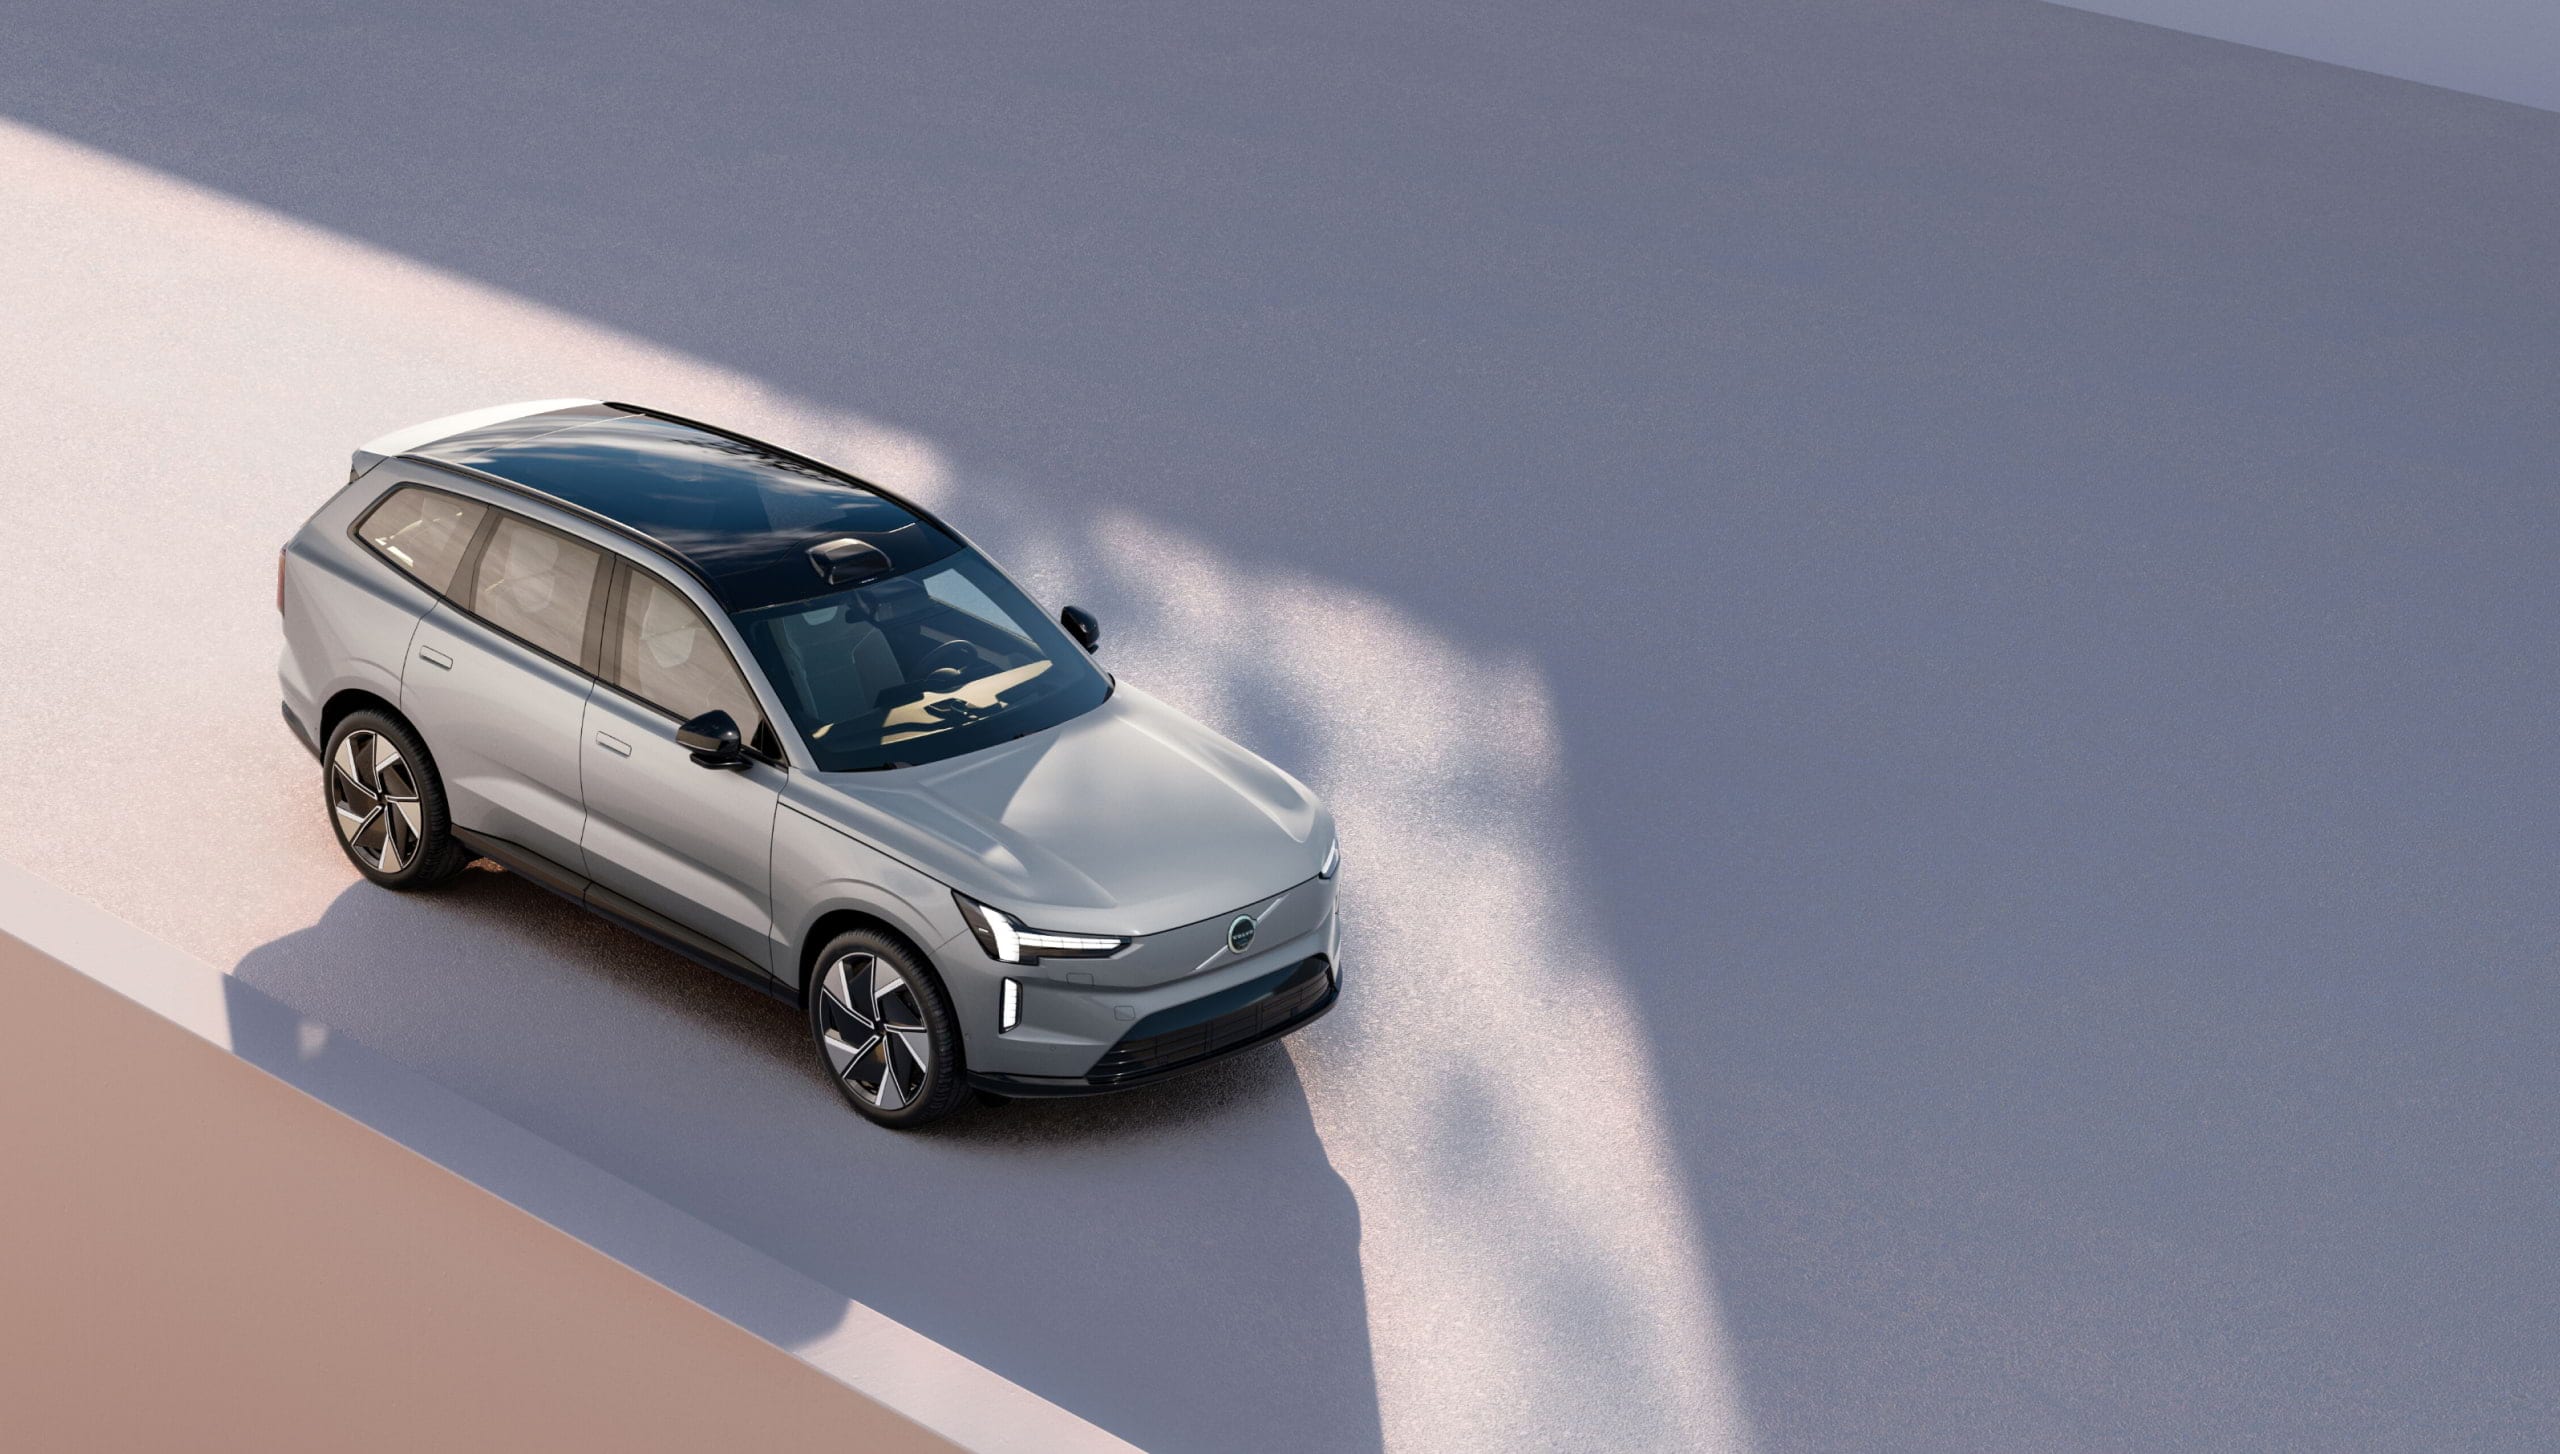 Exterior Design of The Volvo EX90 with Panoramic Roof and LiDar